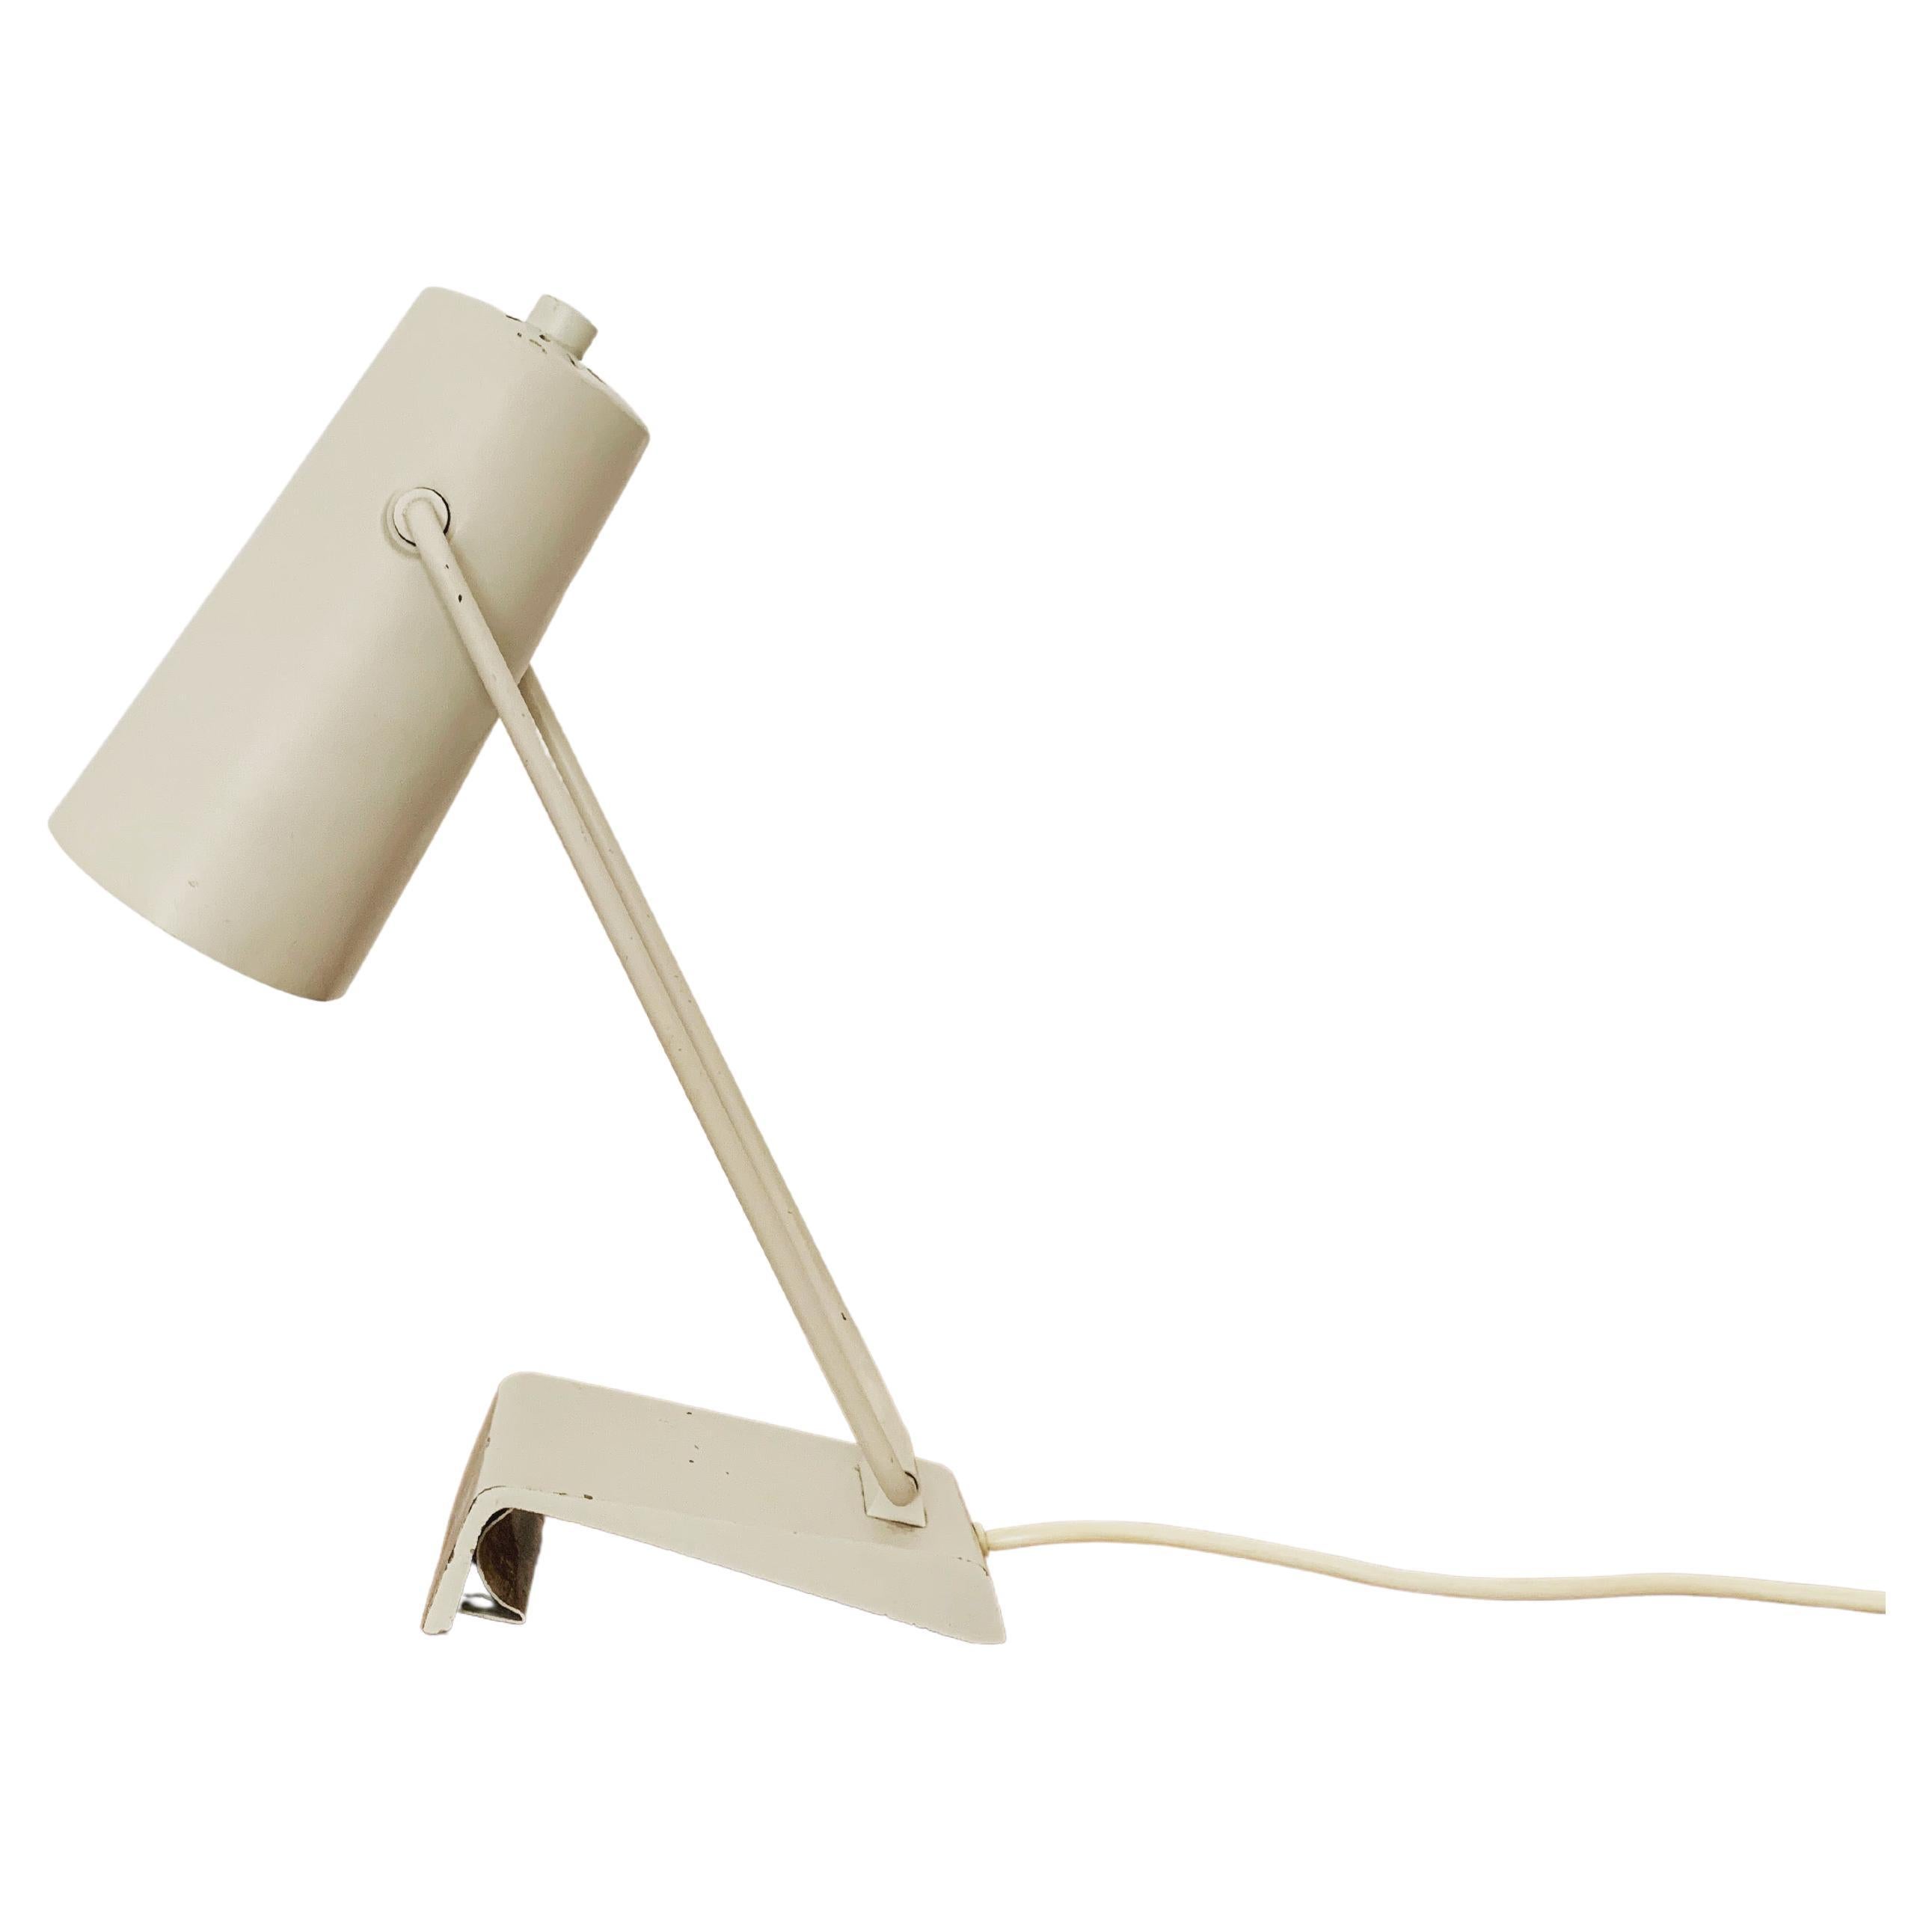 Adjustable Table Lamp or Wall Lamp by Kaiser Leuchten